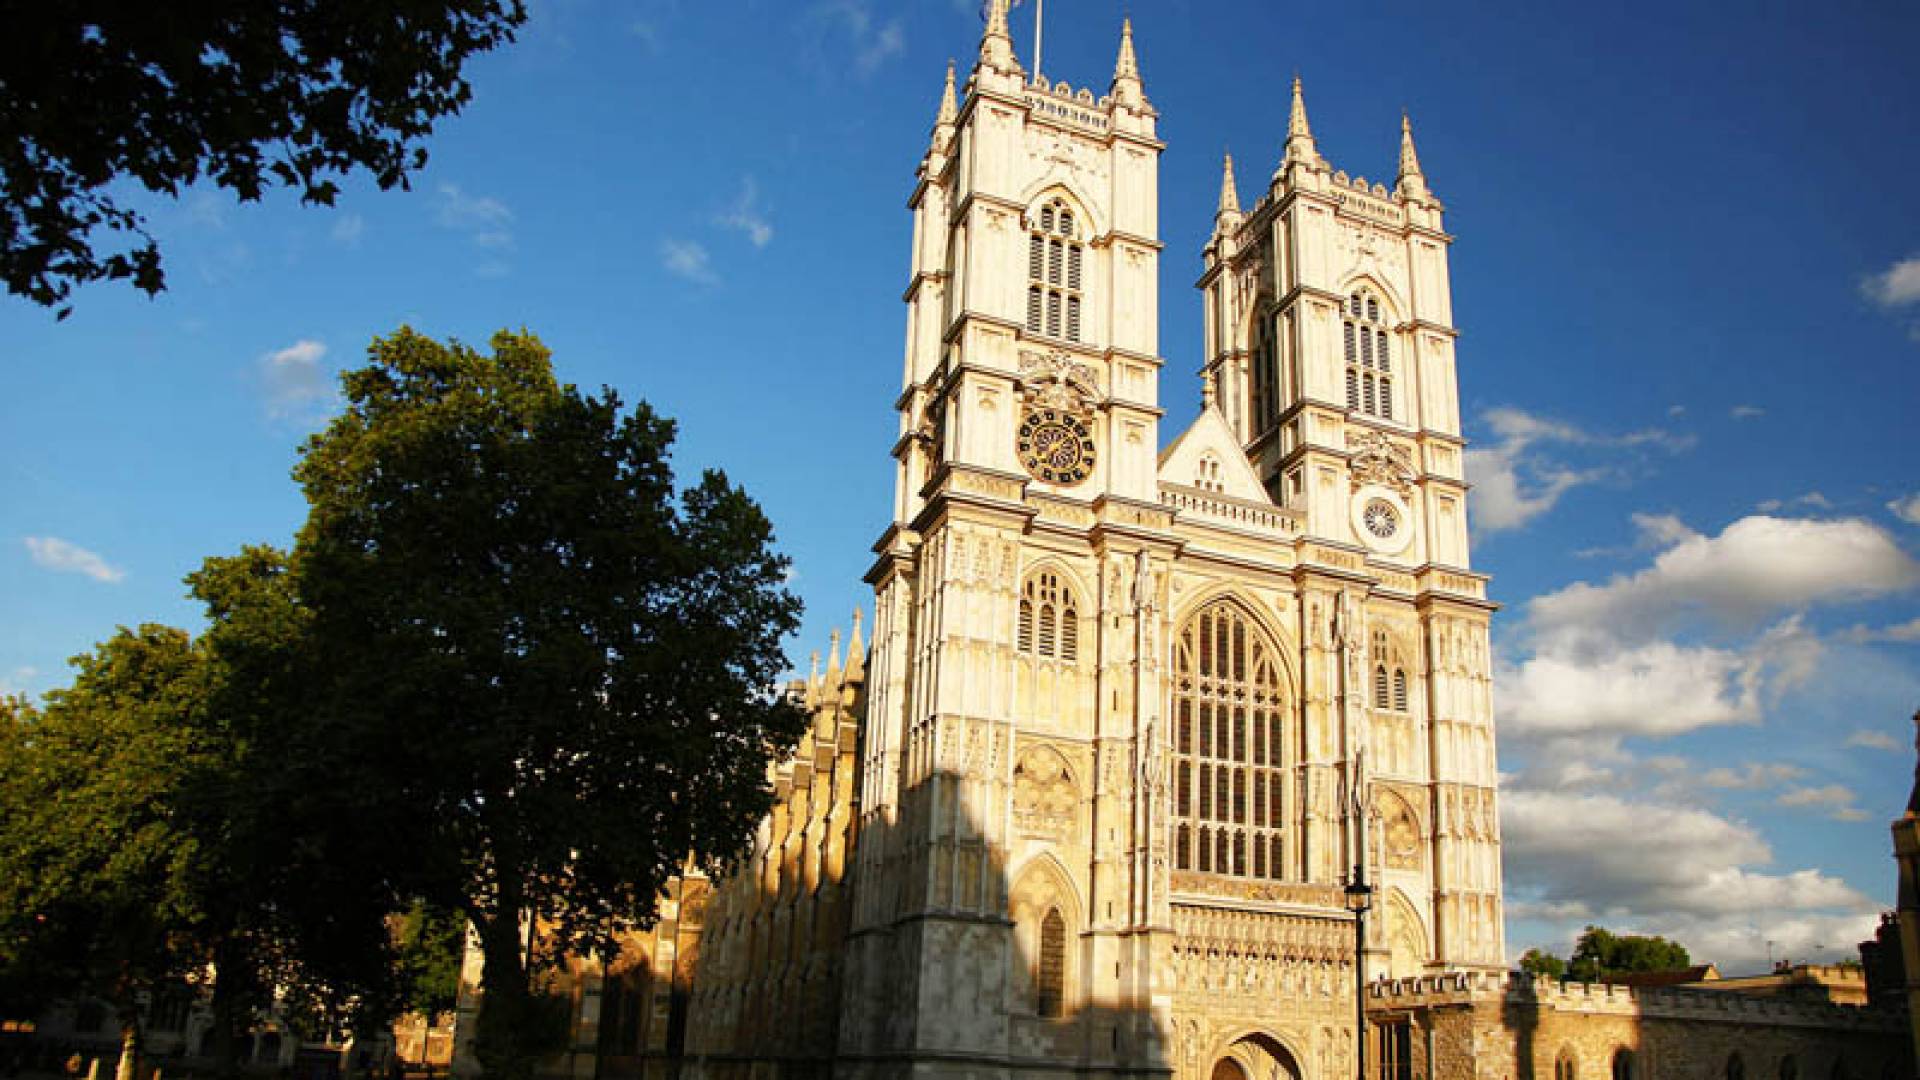 WESTMINSTER ABBEY, History